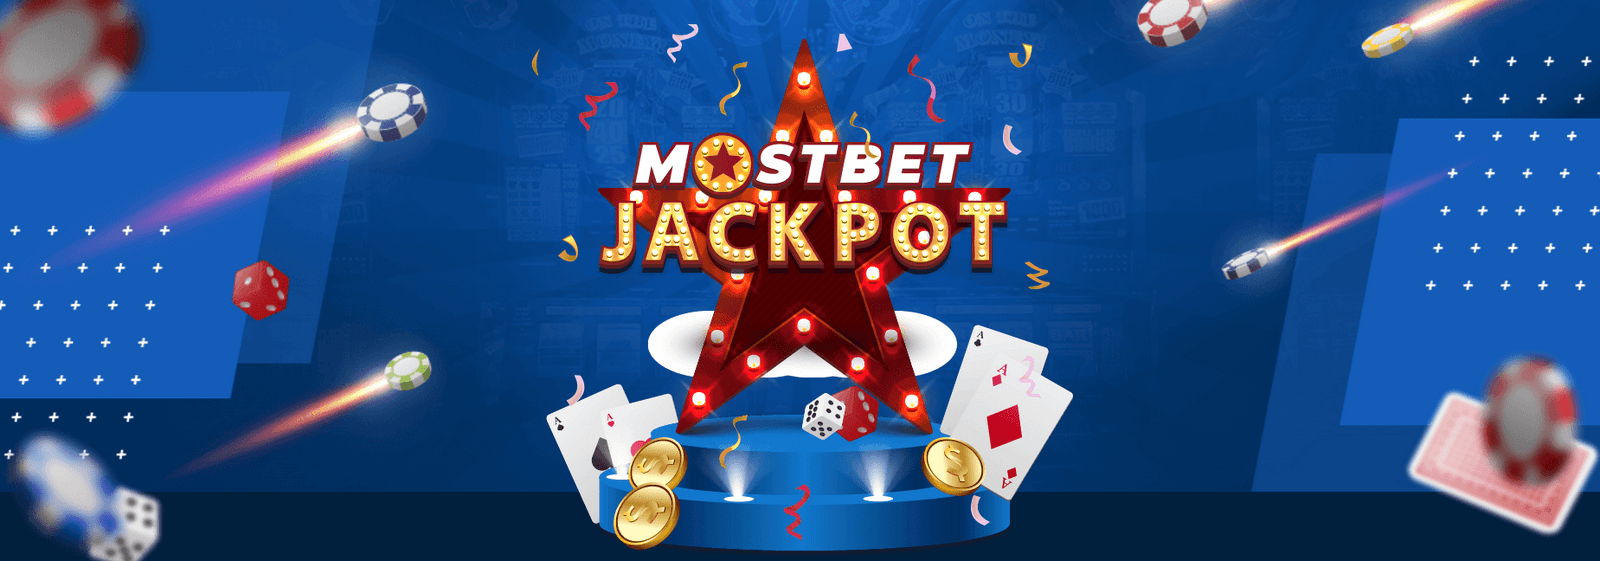 Top 3 Ways To Buy A Used Bookmaker Mostbet and online casino in Kazakhstan